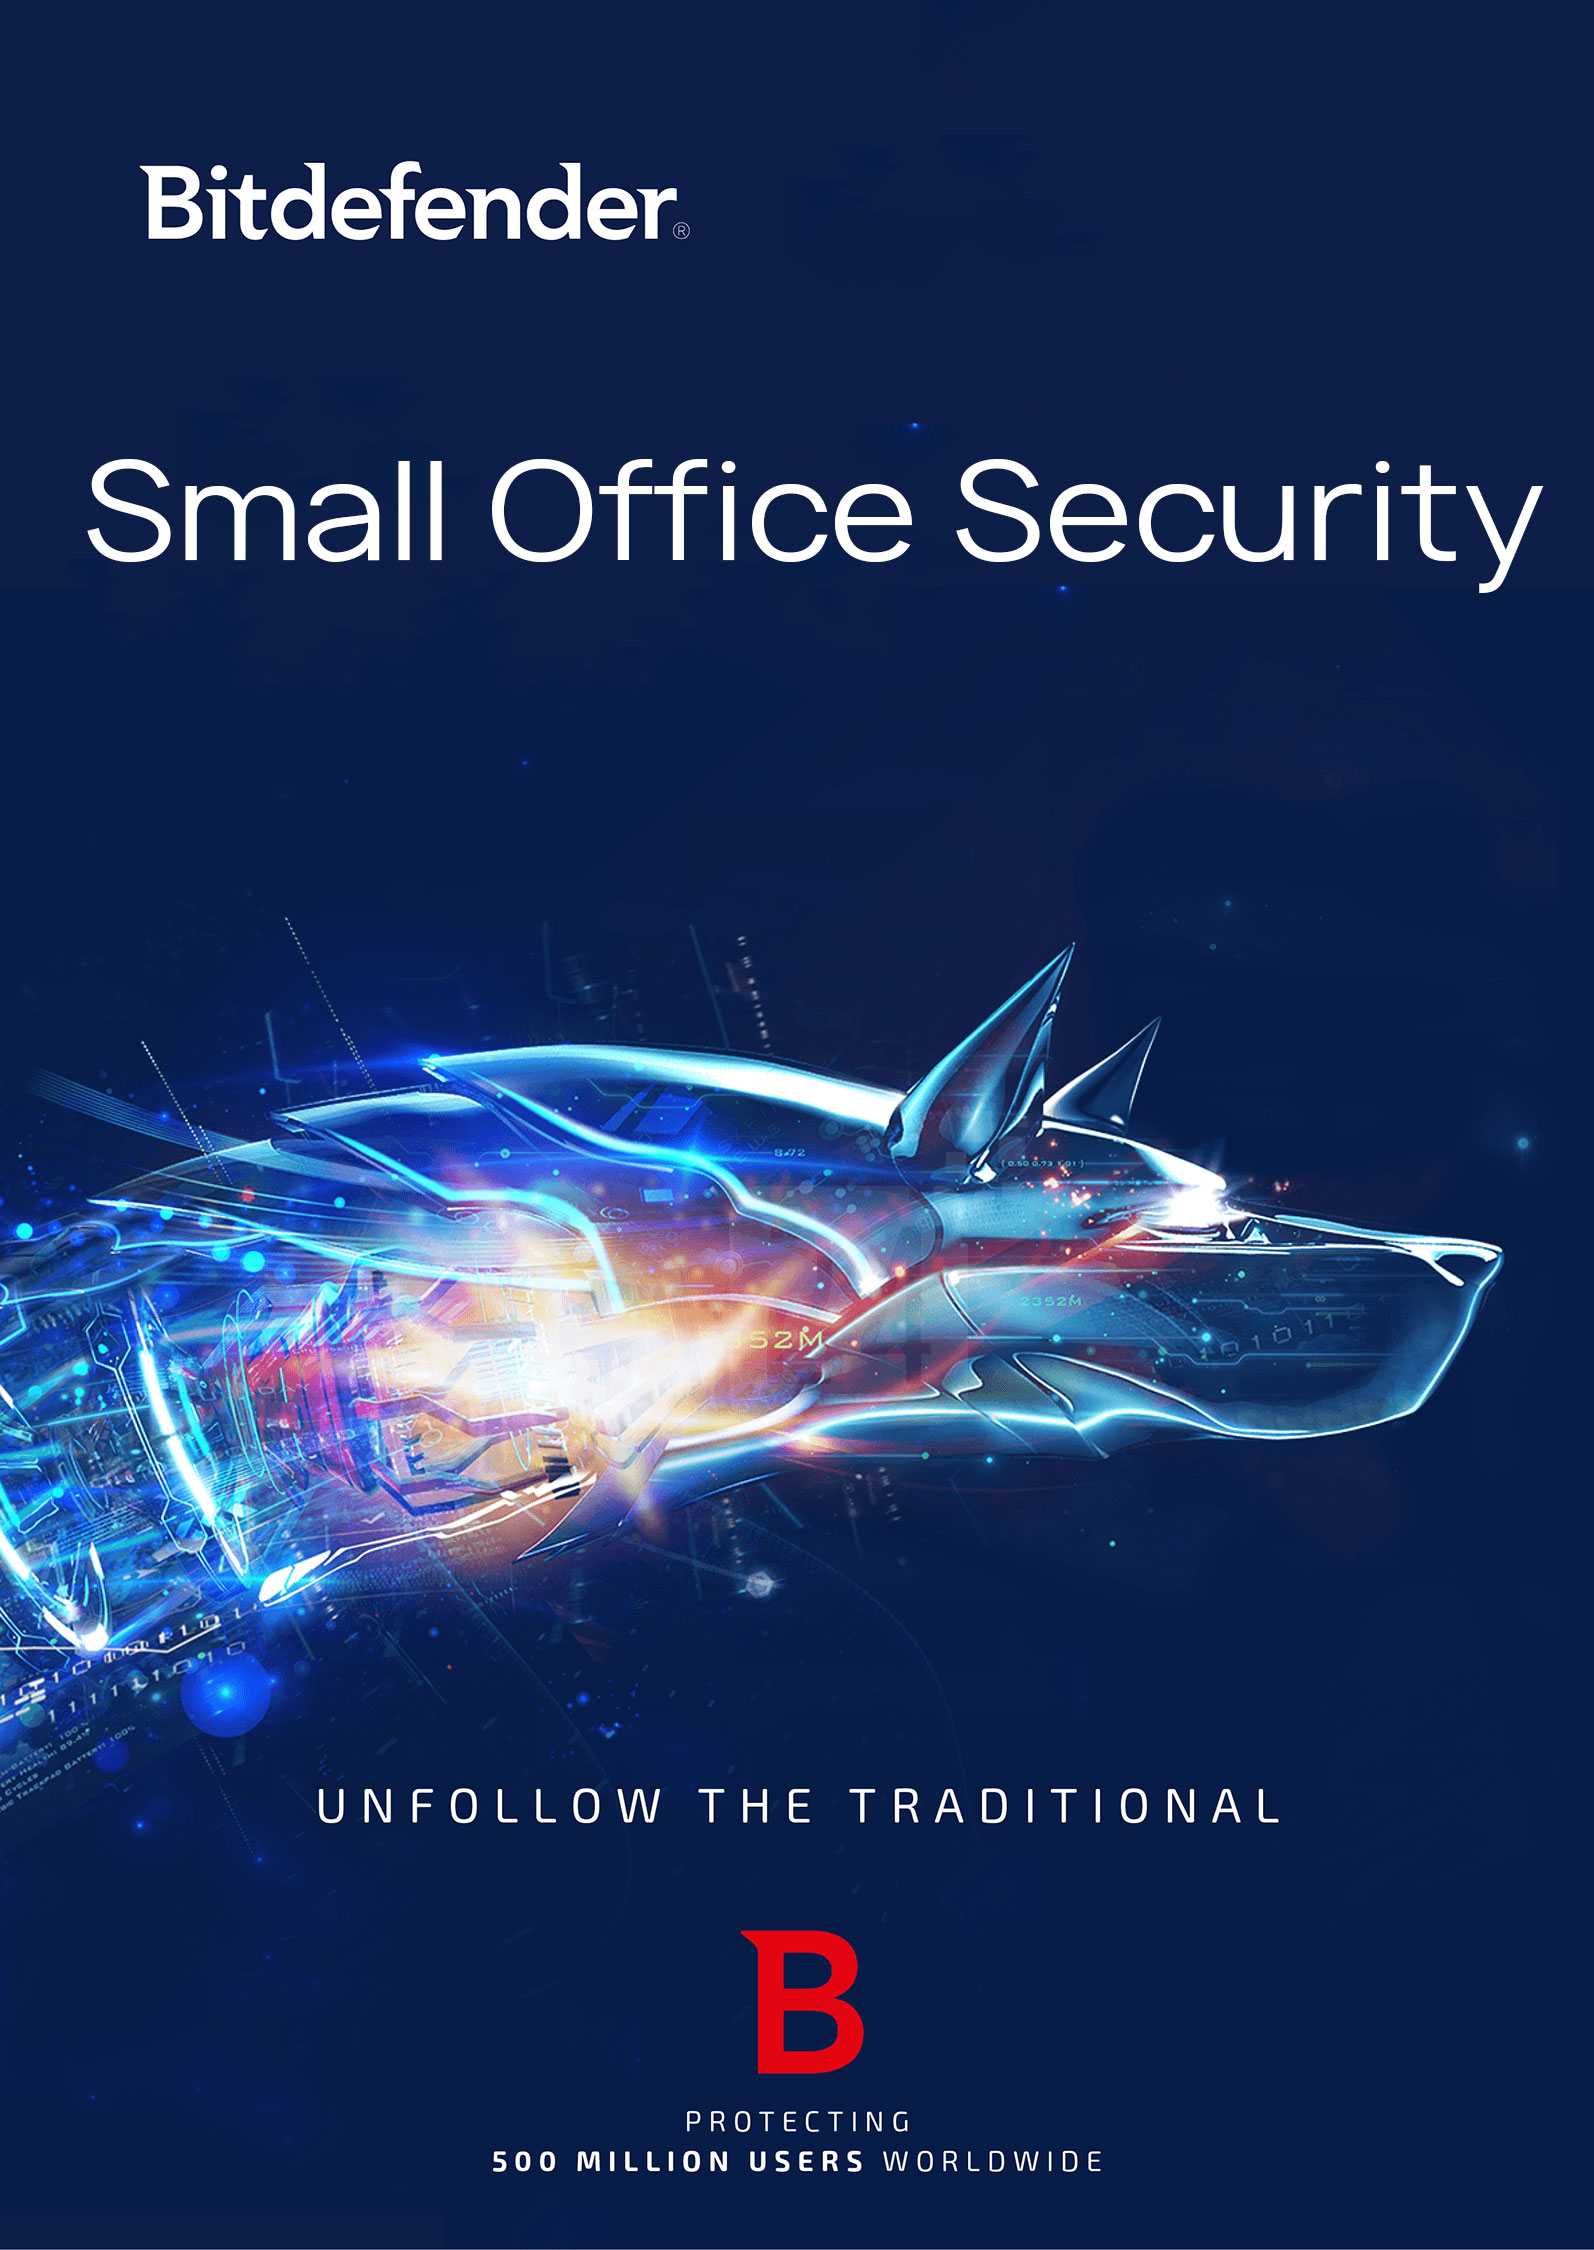 Bitdefender SMALL OFFICE SECURITY (20) | MagicNet